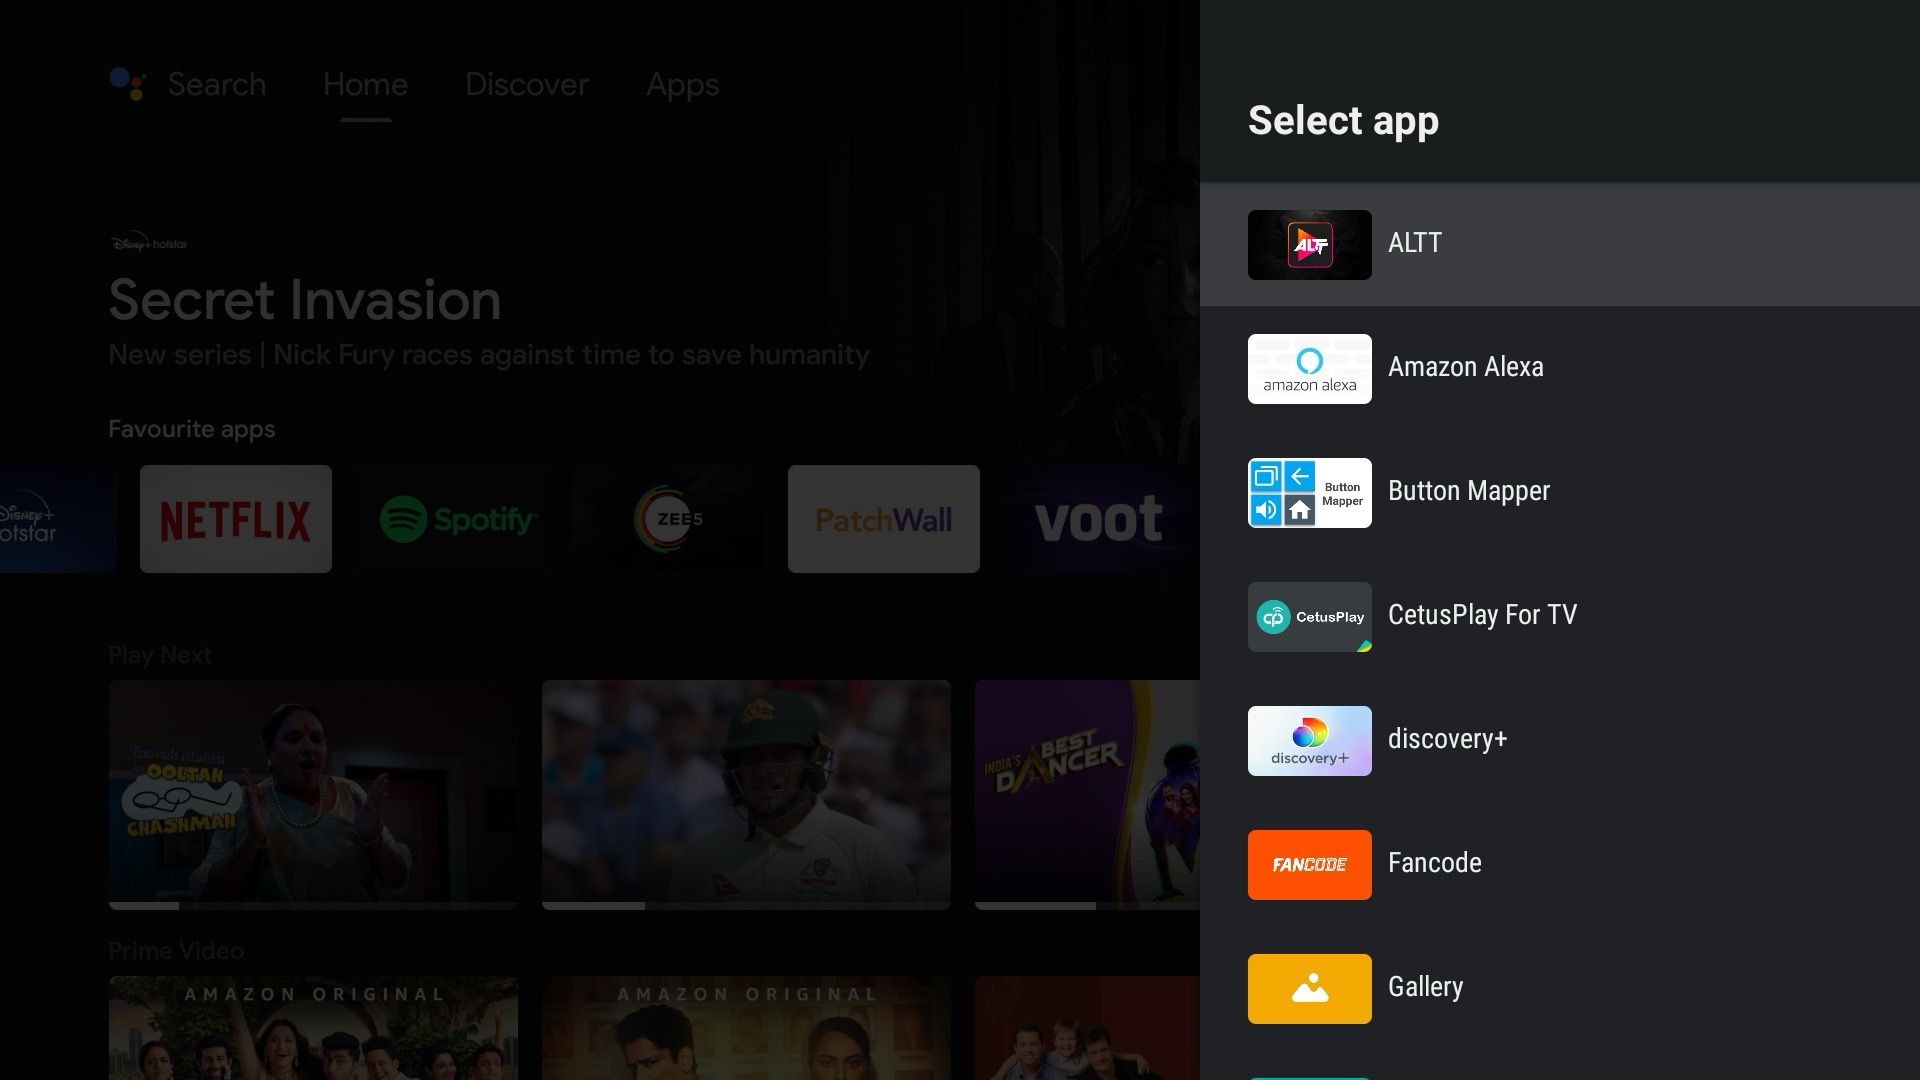 7 Android TV tips and tricks to maximize your TV time